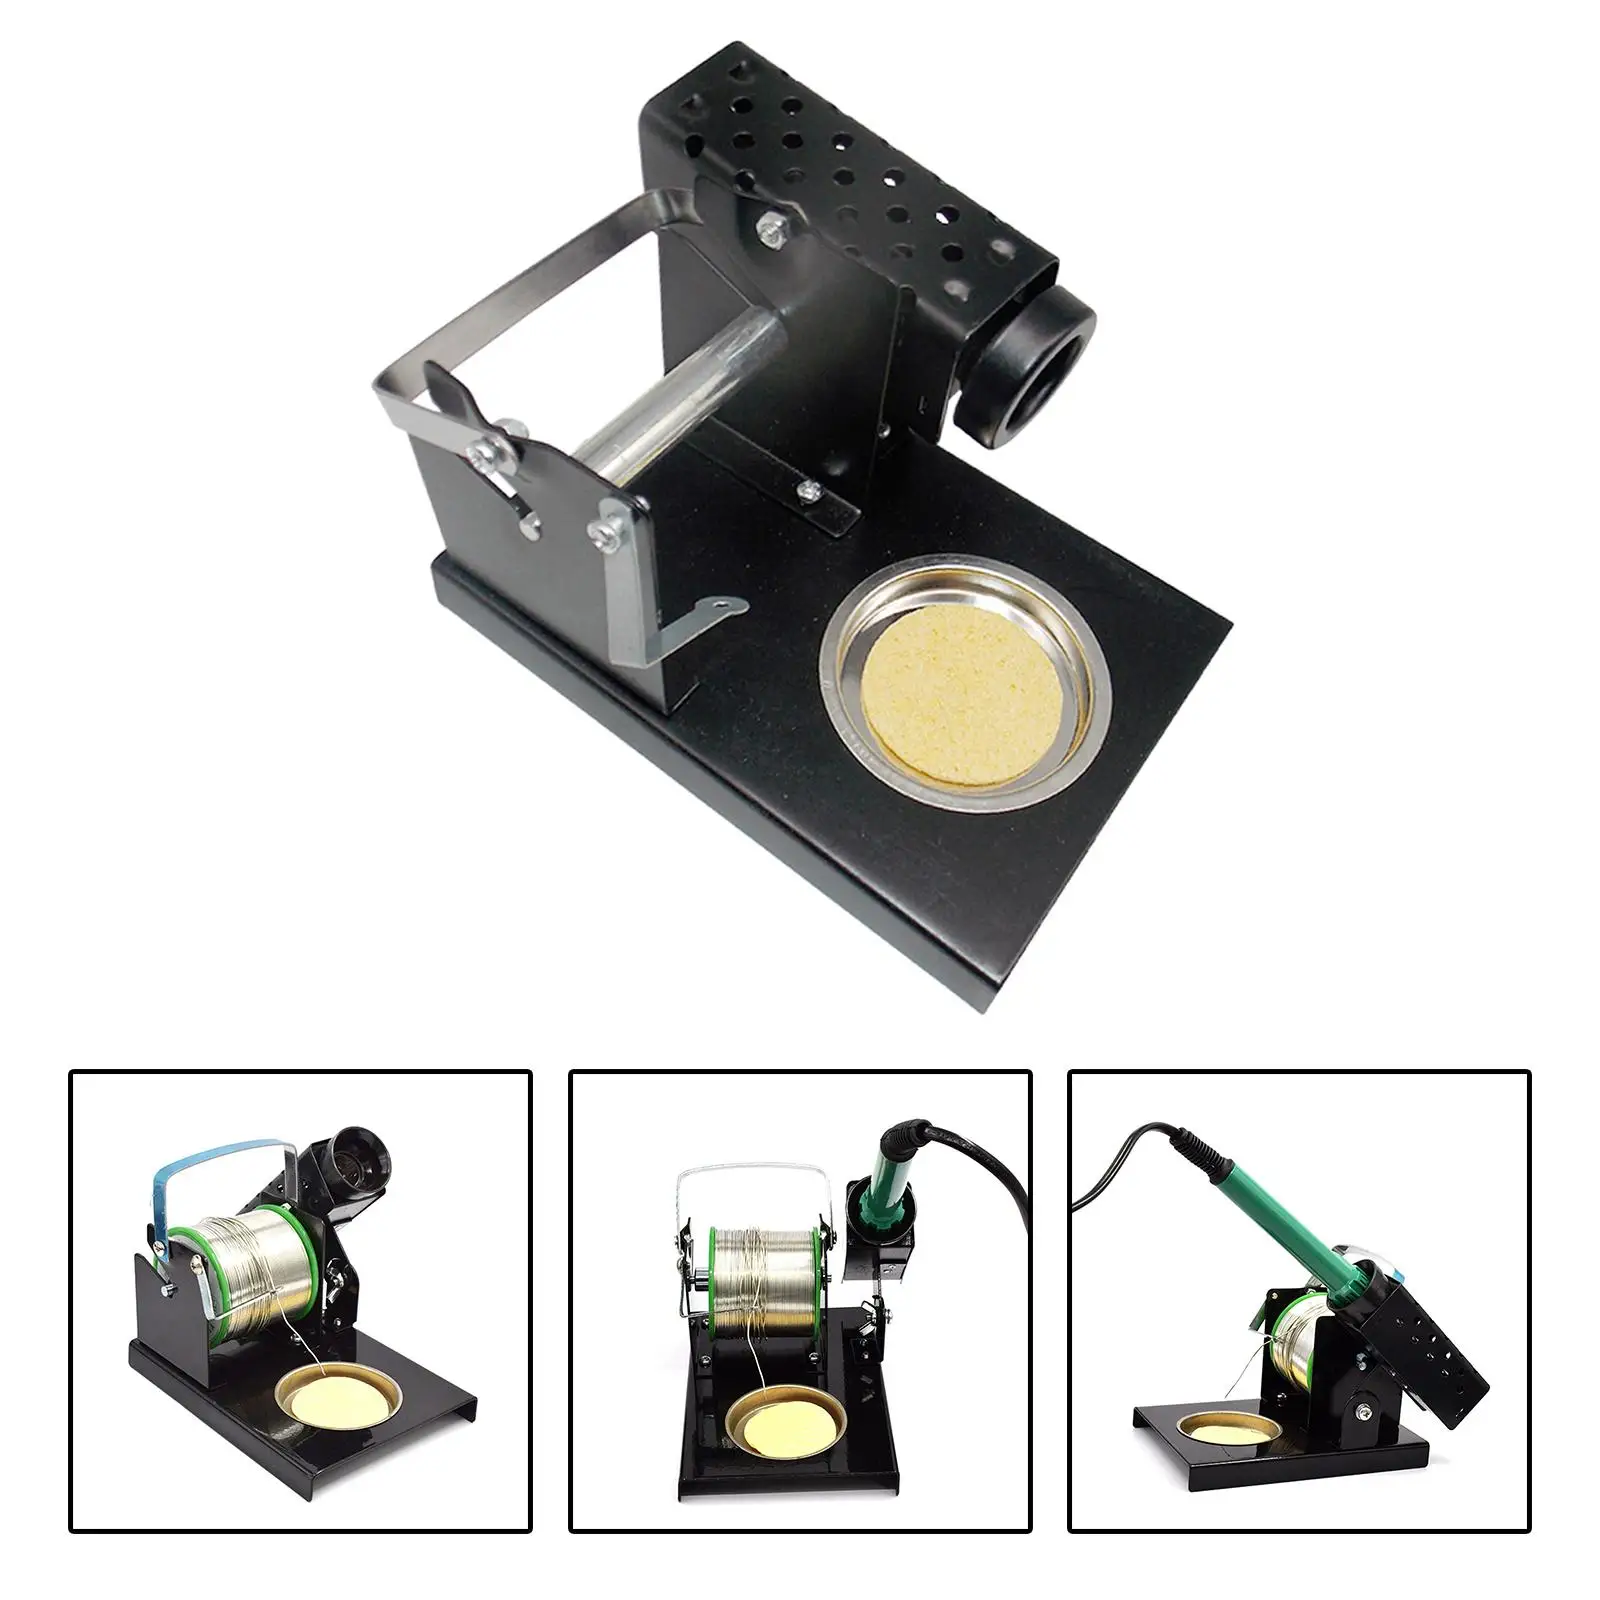 Heavy Duty Solder Iron Holder with Cleaning Sponge Welding Accessories Metal Base High Temperature Resistance